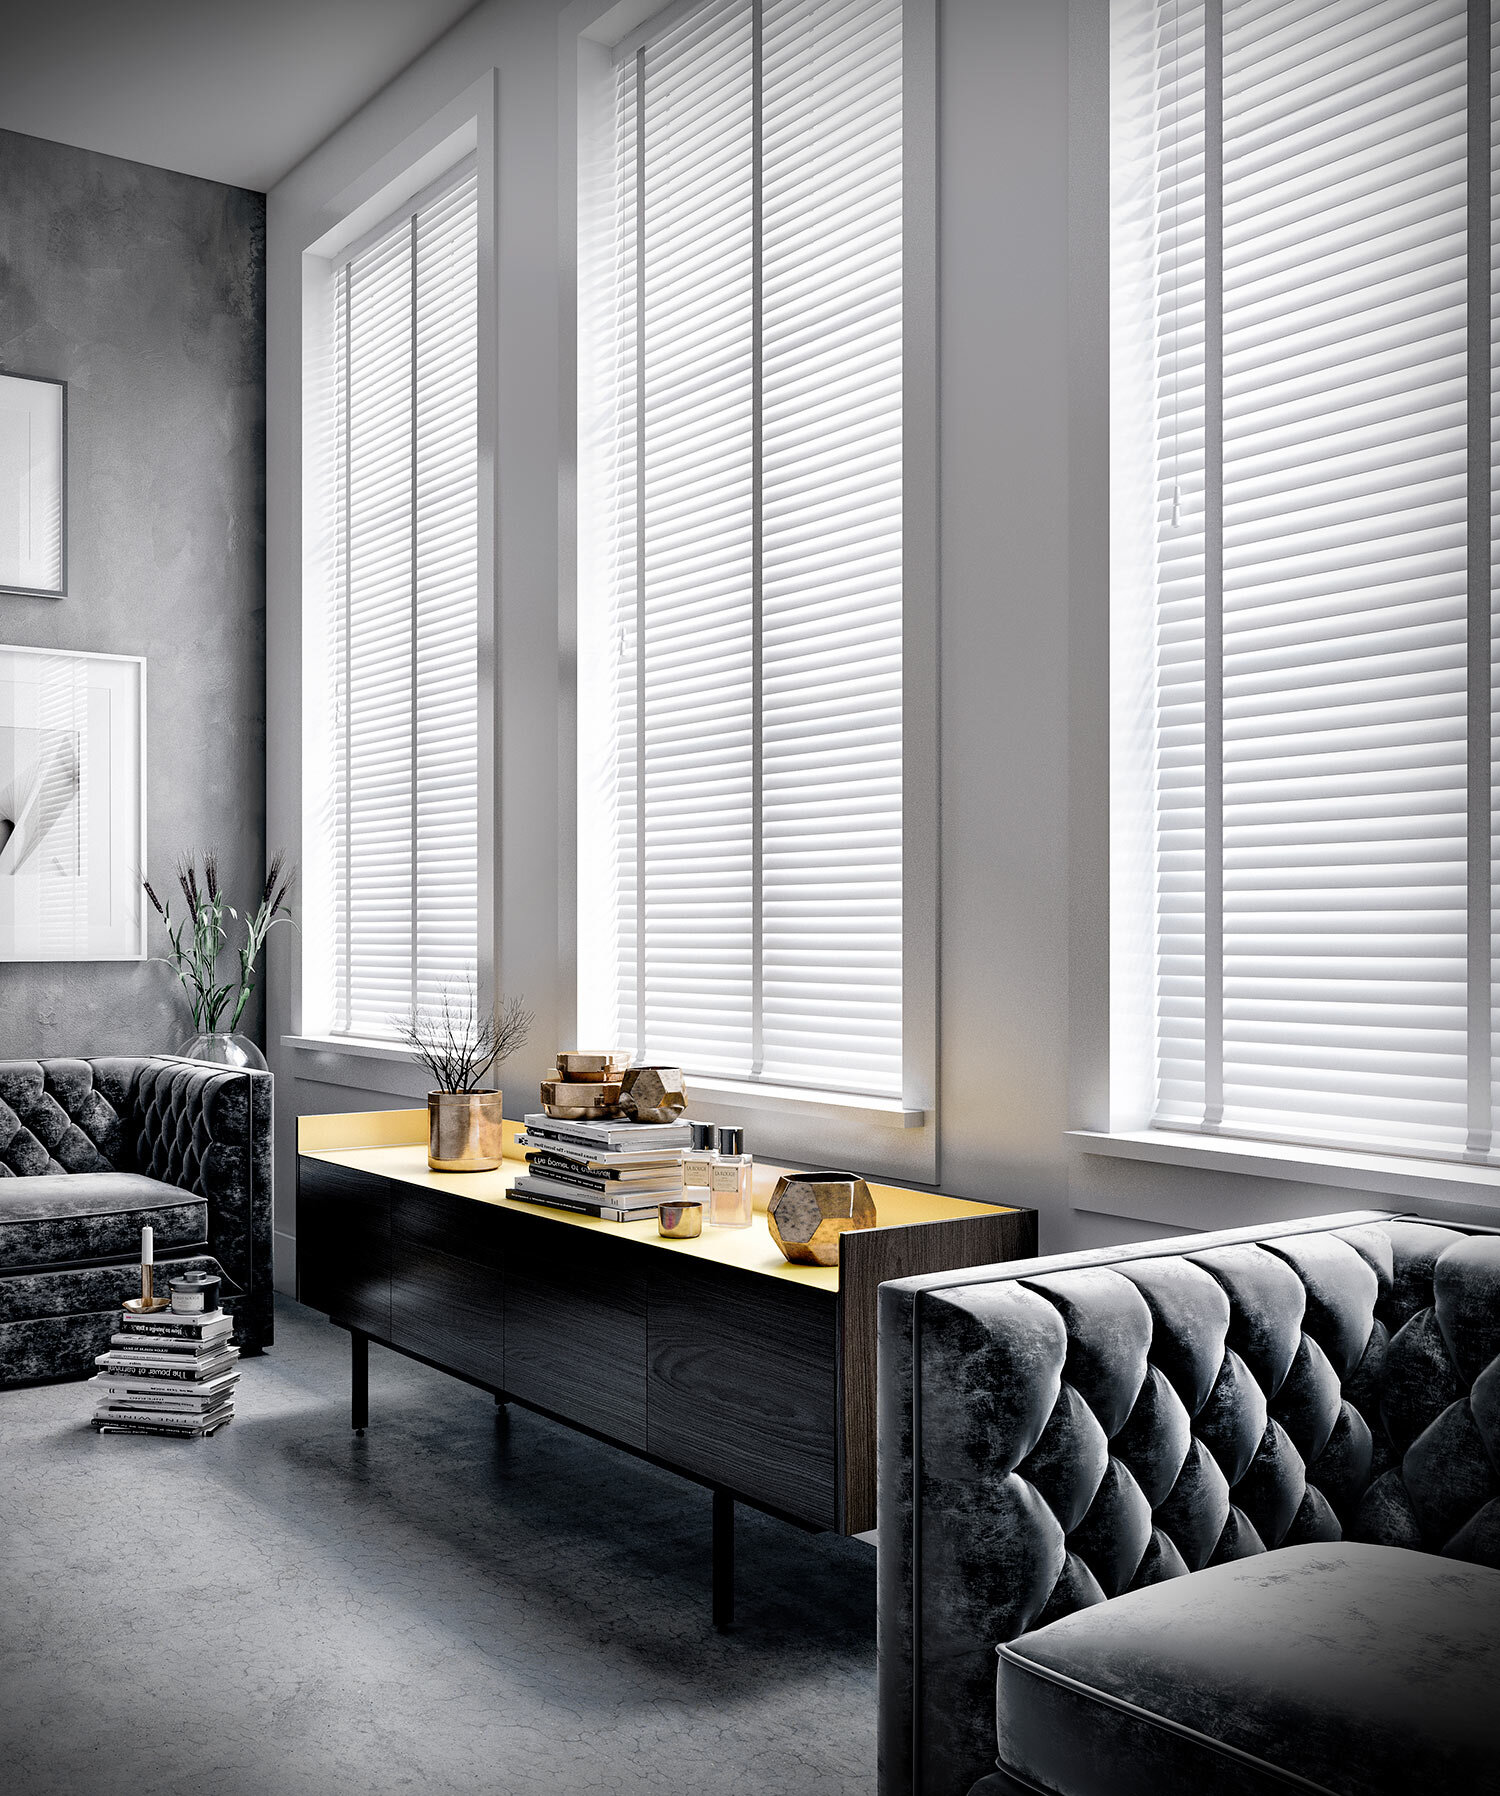 Electric Window Blinds Basingstoke. Electric blinds can either be mains or battery powered. We offer a great retro-fit rechargeable battery solution for all types of remote controlled window blinds. 